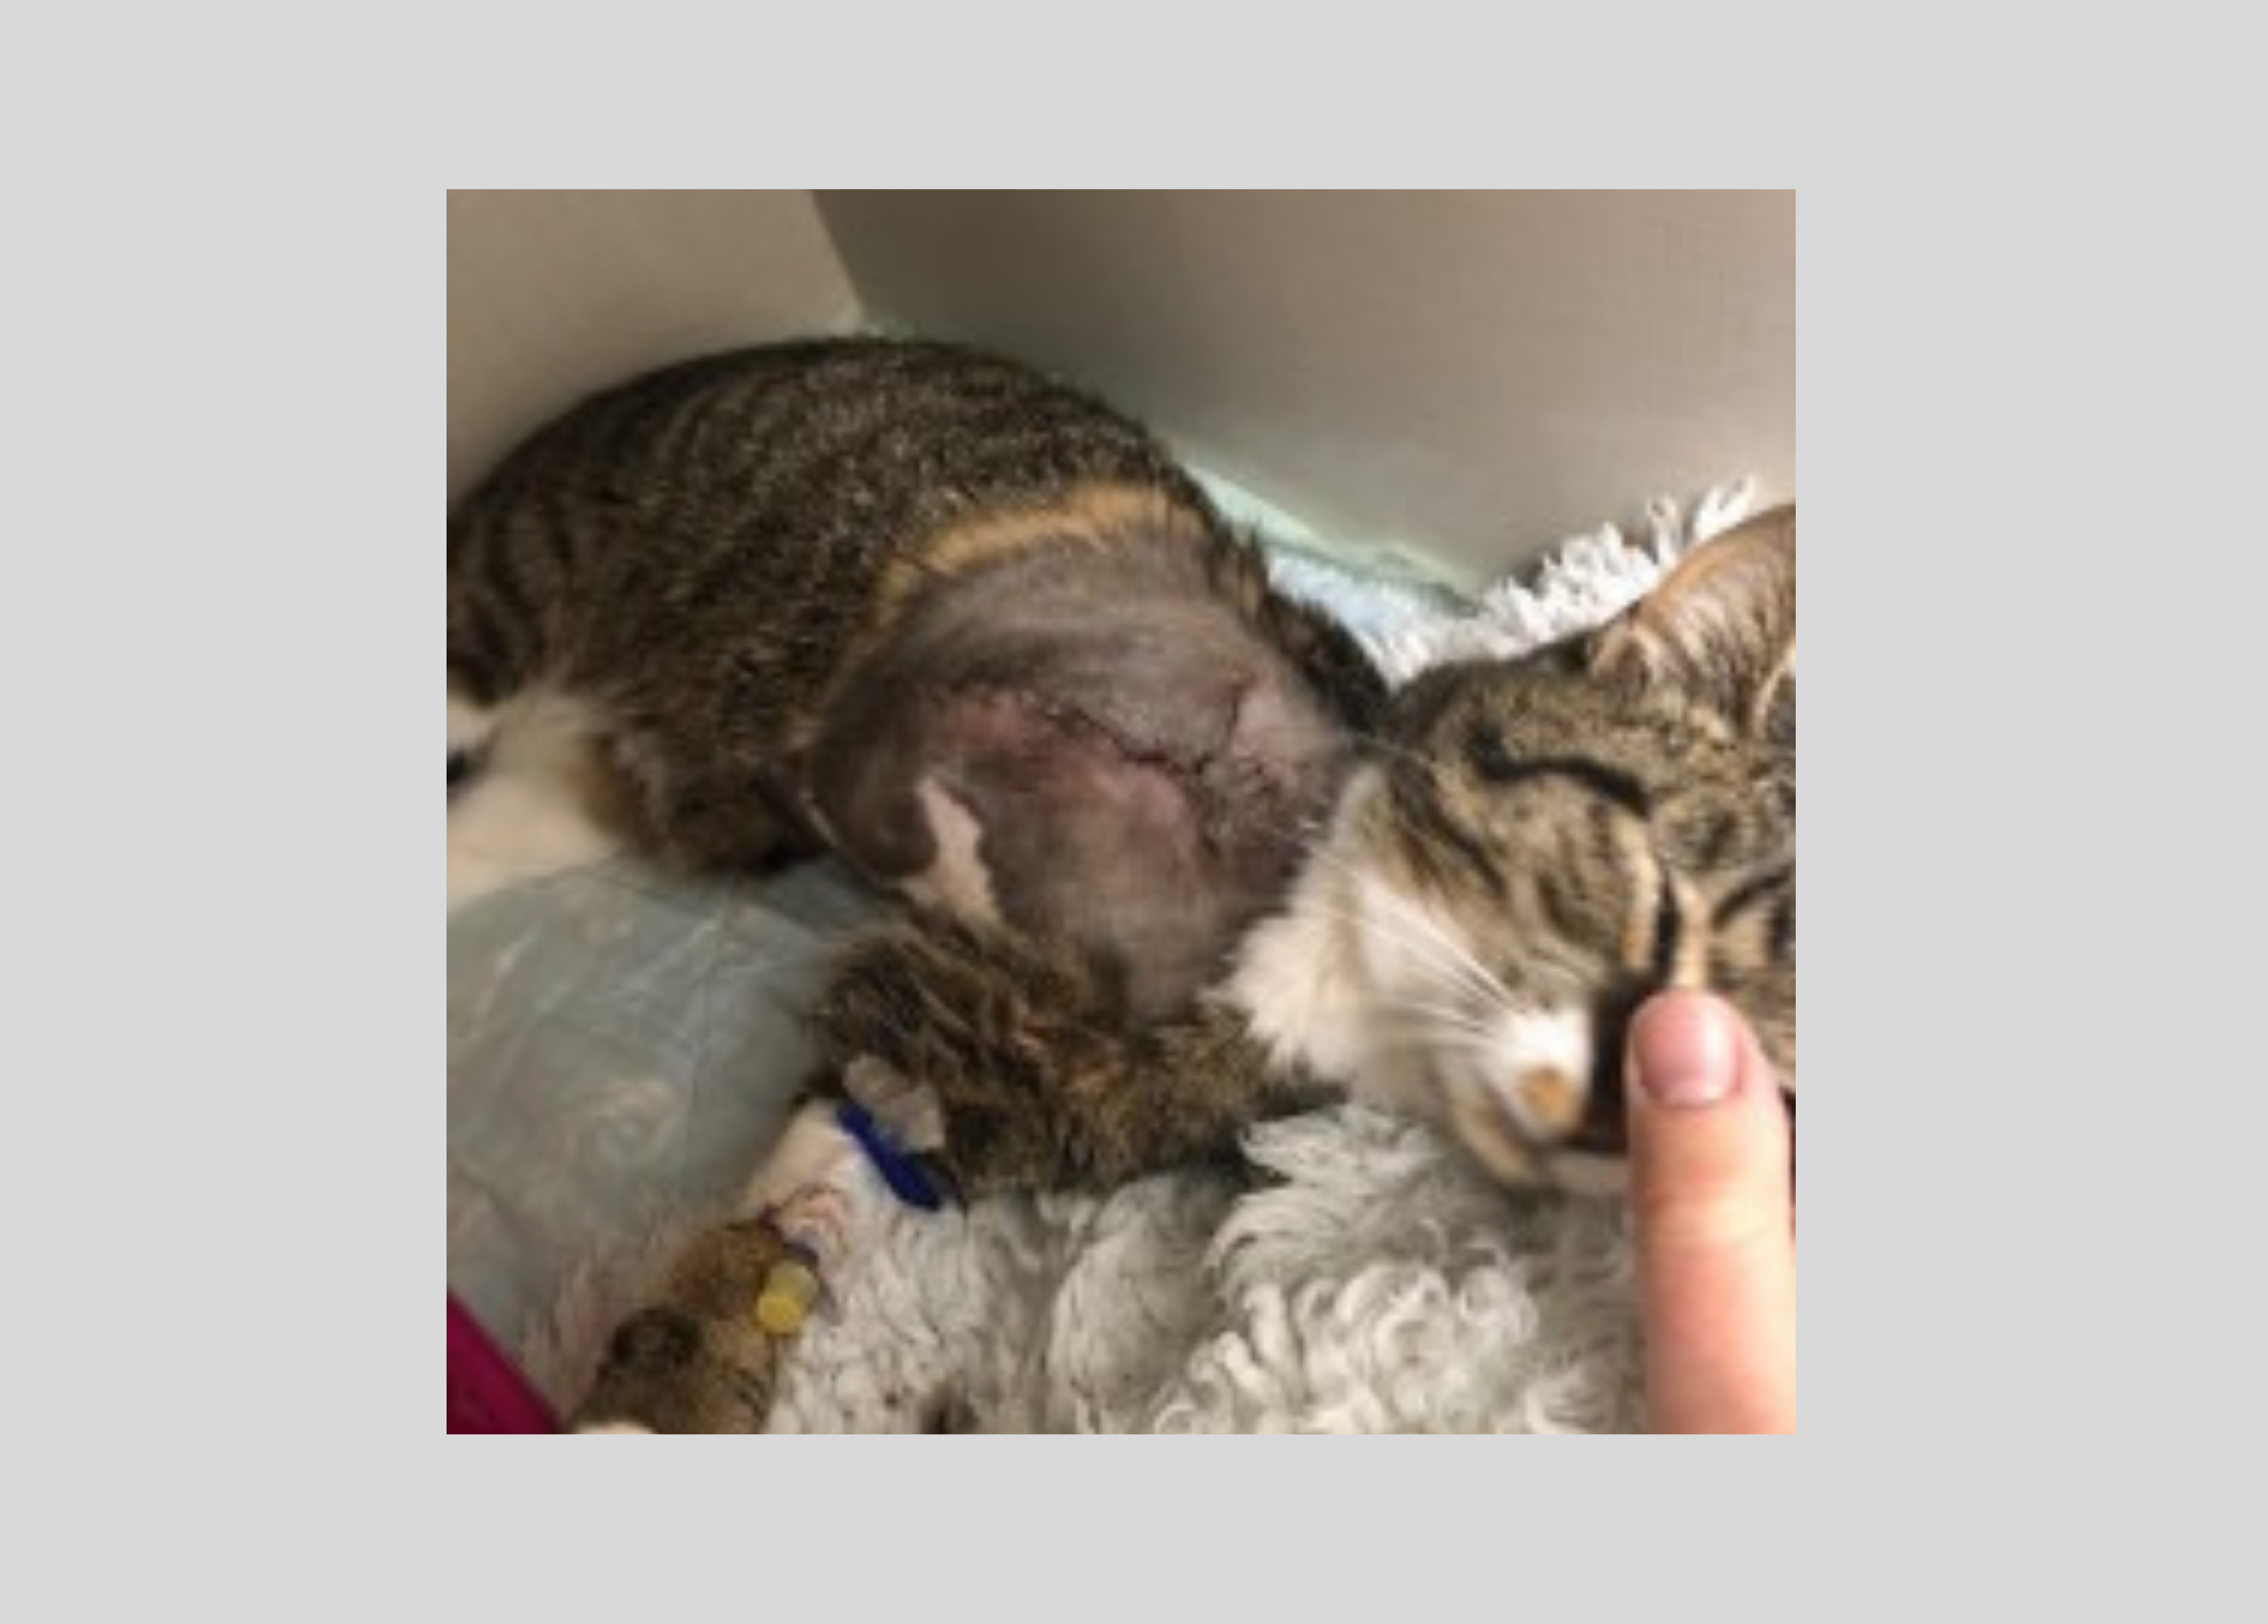 NEWS | Appeal launched after tabby cat loses leg after shooting near Builth Wells